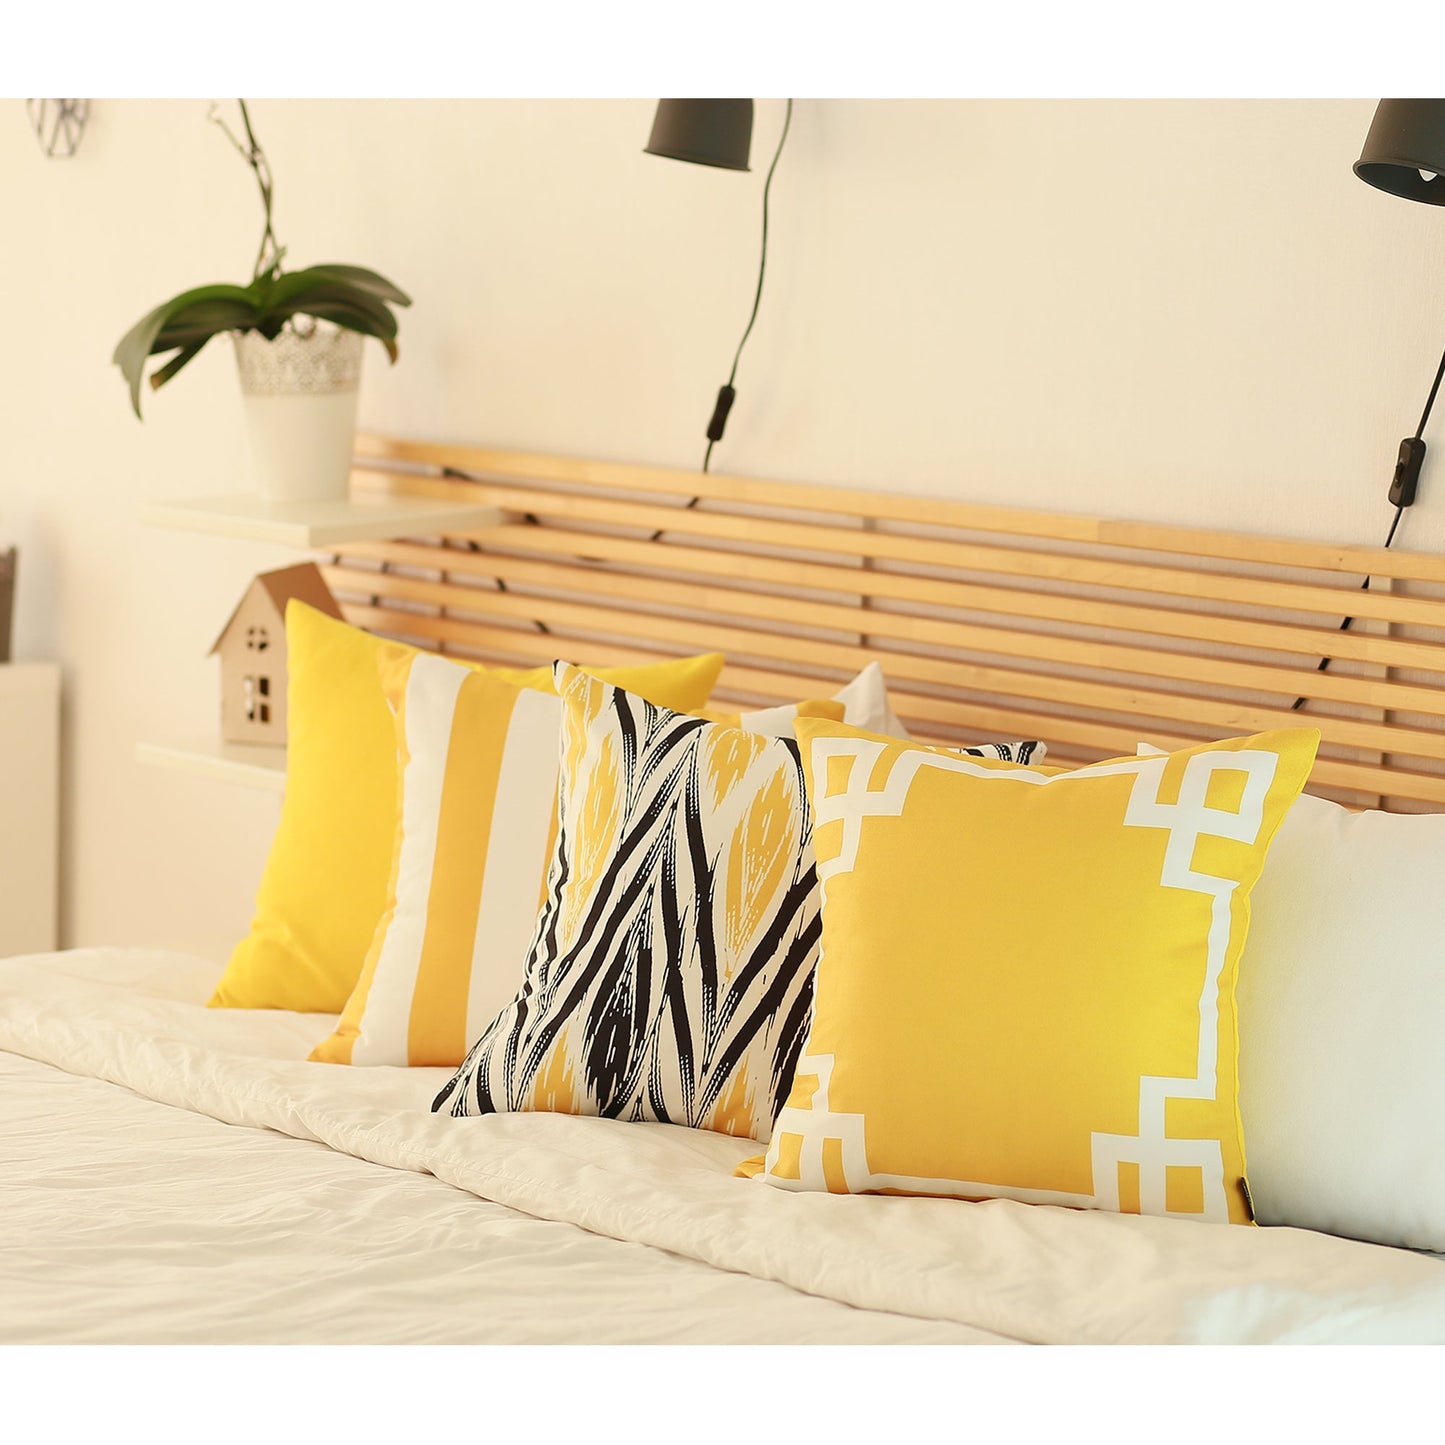 Geometric Yellow Lit Square 18" Throw Pillow Cover (Set of 4)